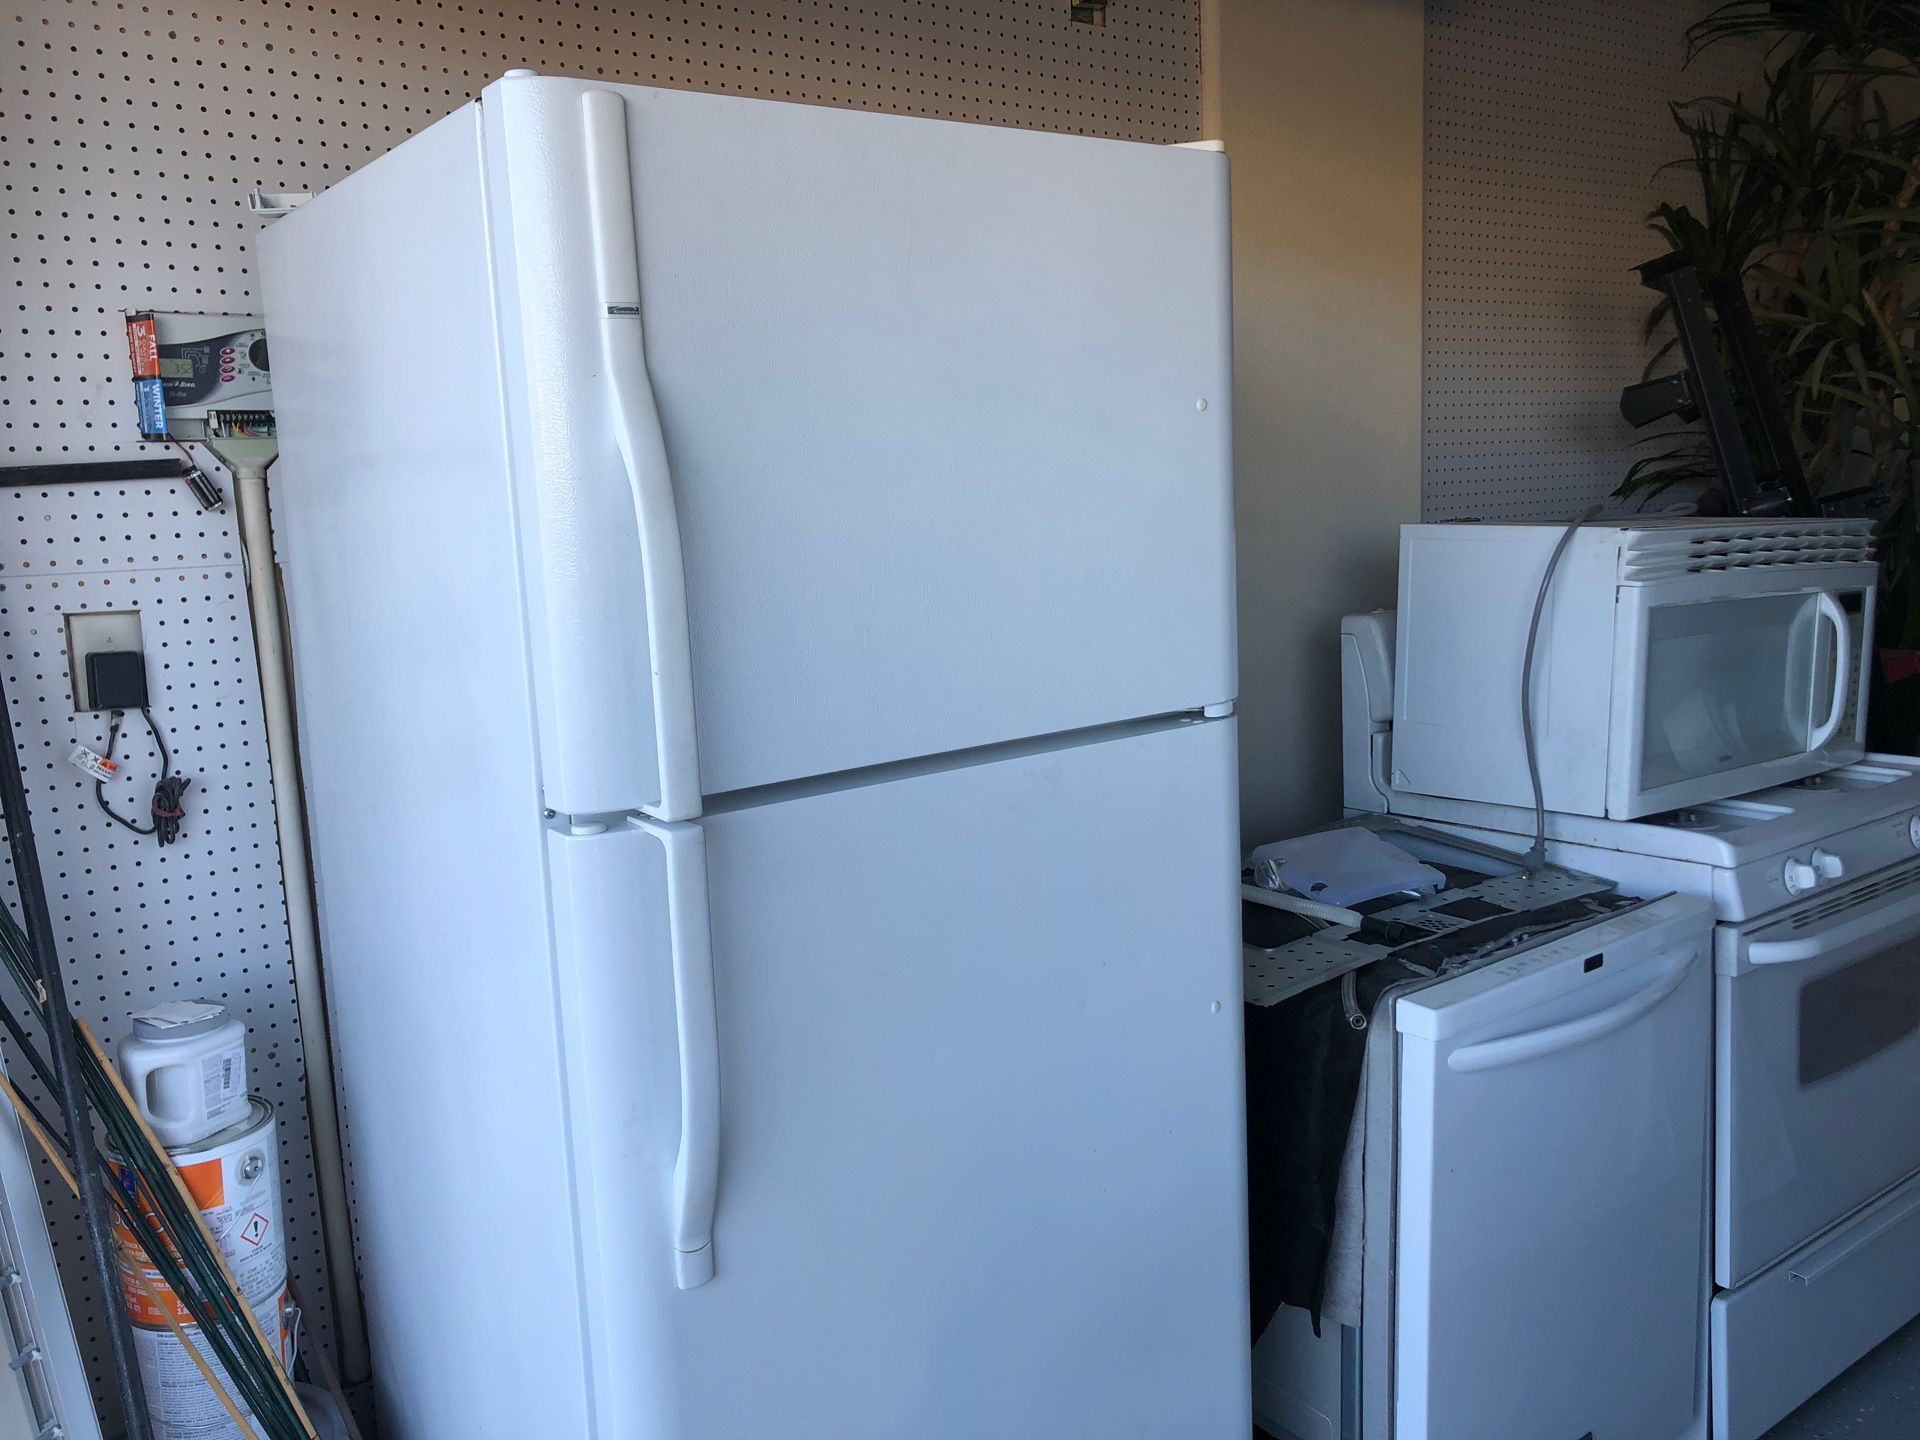 Kenmore refrigerator W/ ice maker, micro wave and oven